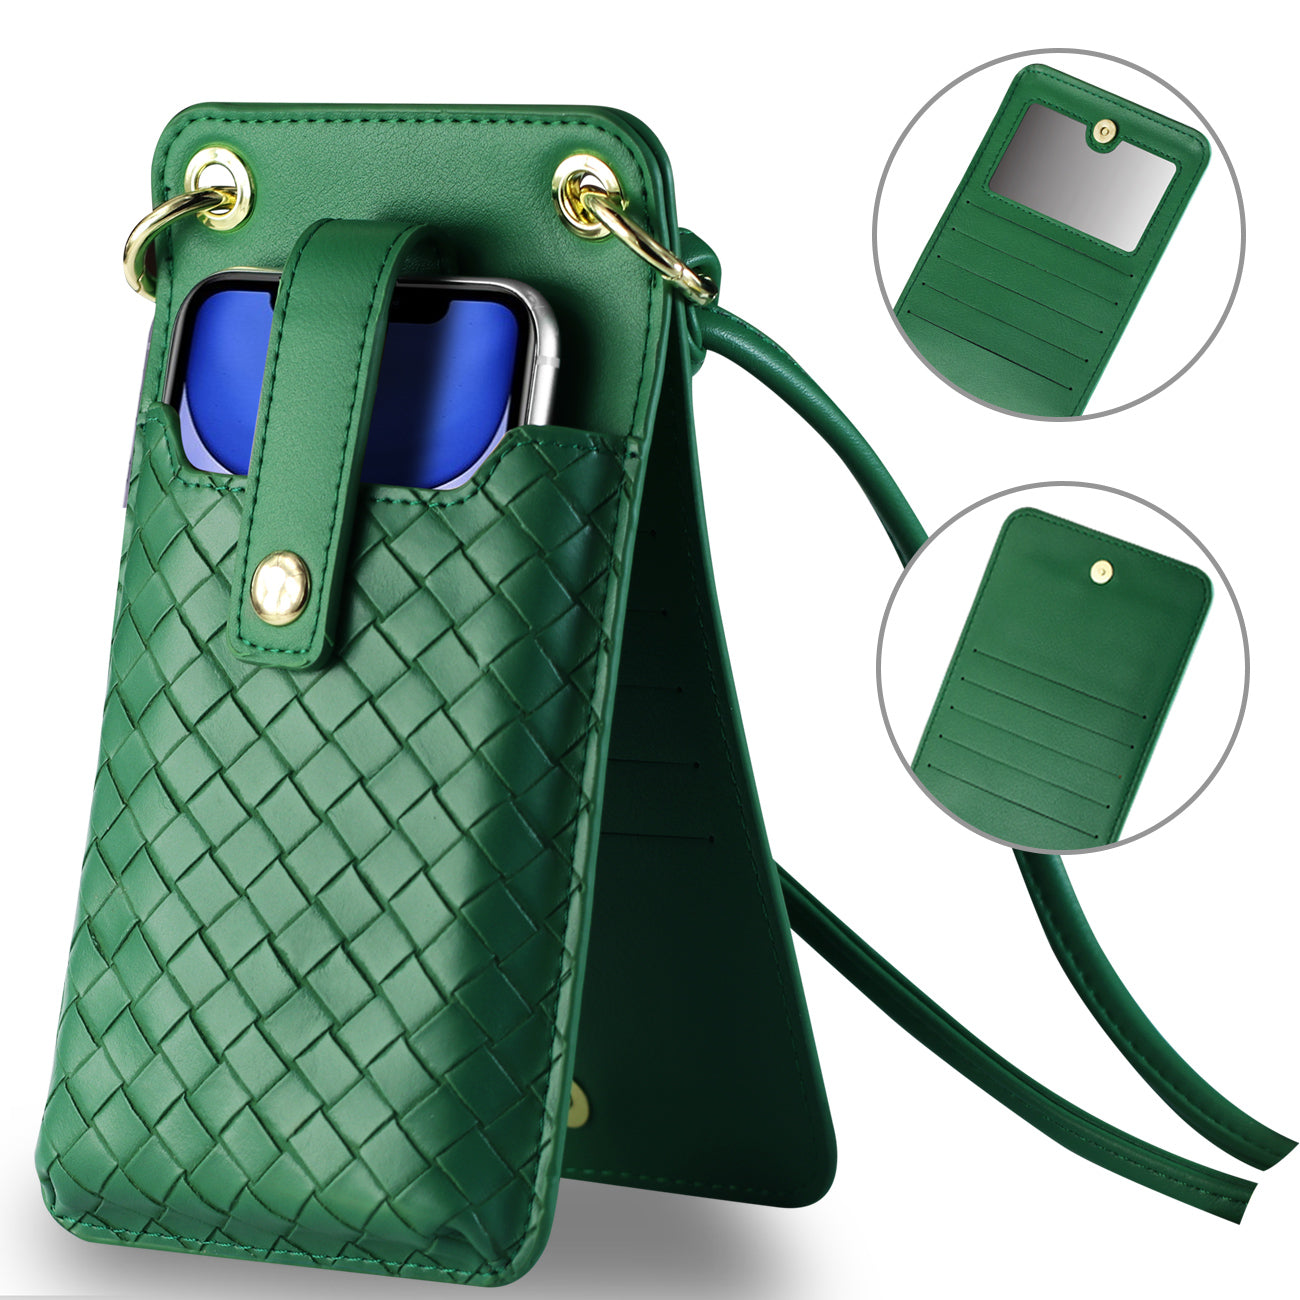 Reiko Leather Crossbody Phone Wallet Small Purse In Green